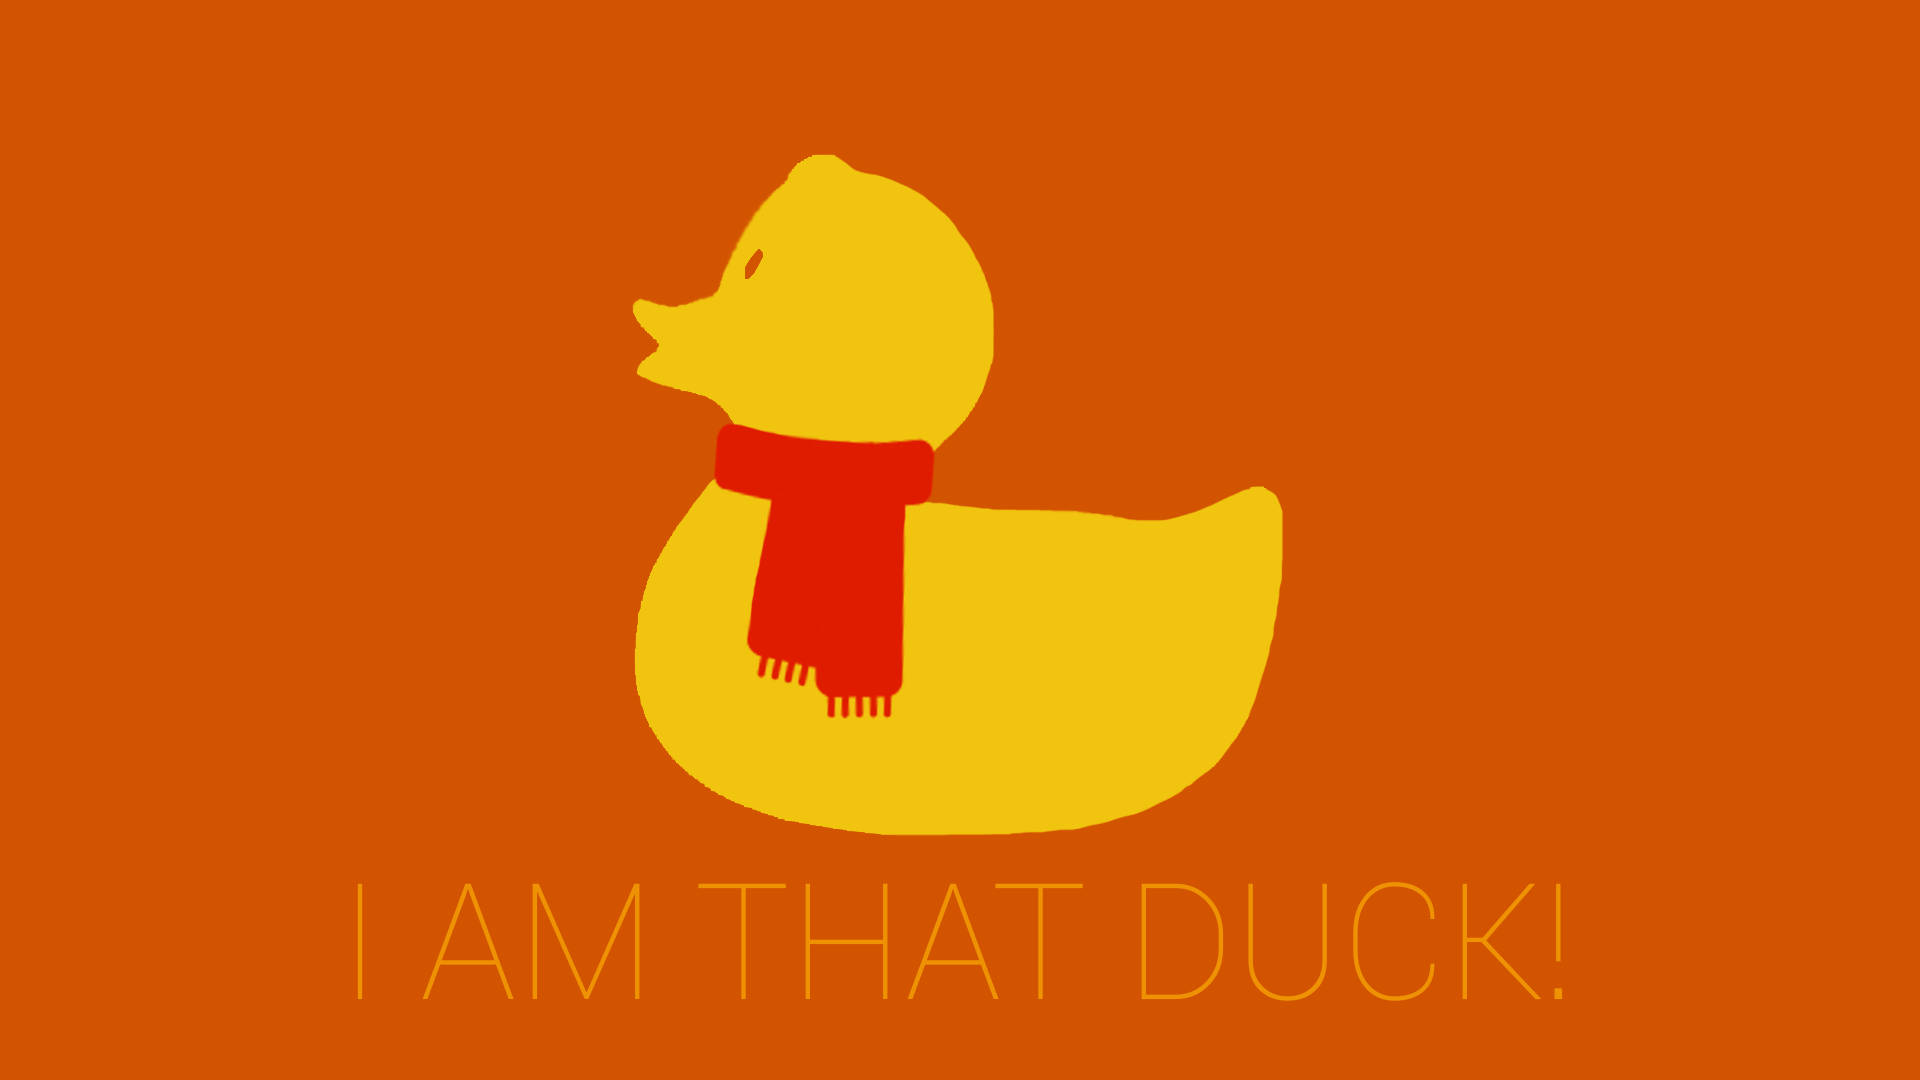 I Am That Duck Background